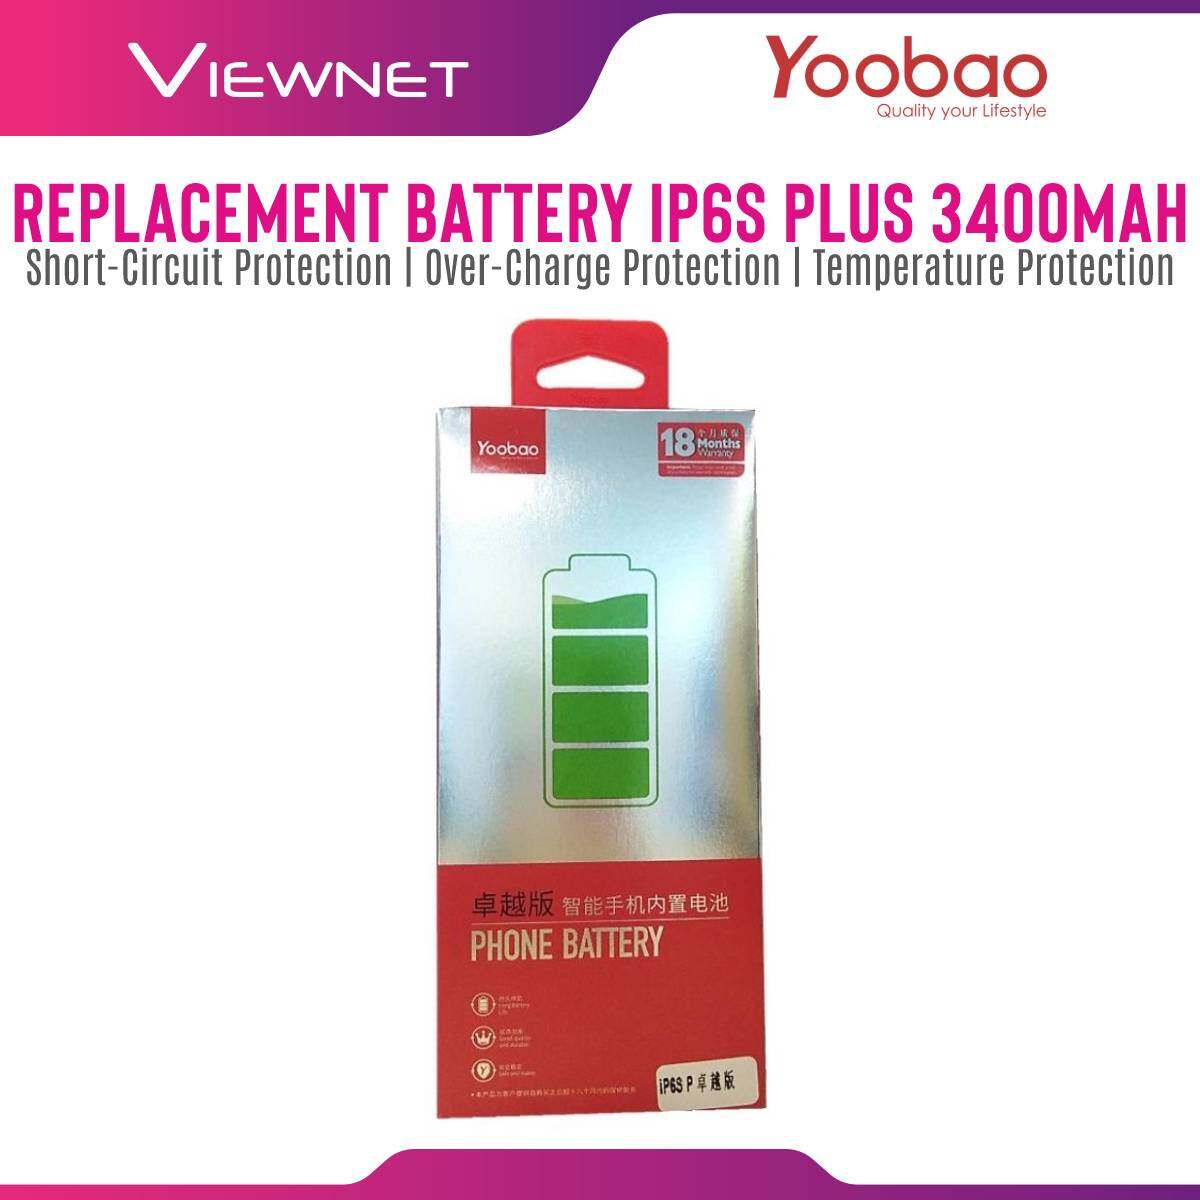 Yoobao 3400mAh ATL Version iPhone 6S Plus Replacement Phone Battery Long Battery Life with 12 Month Warranty